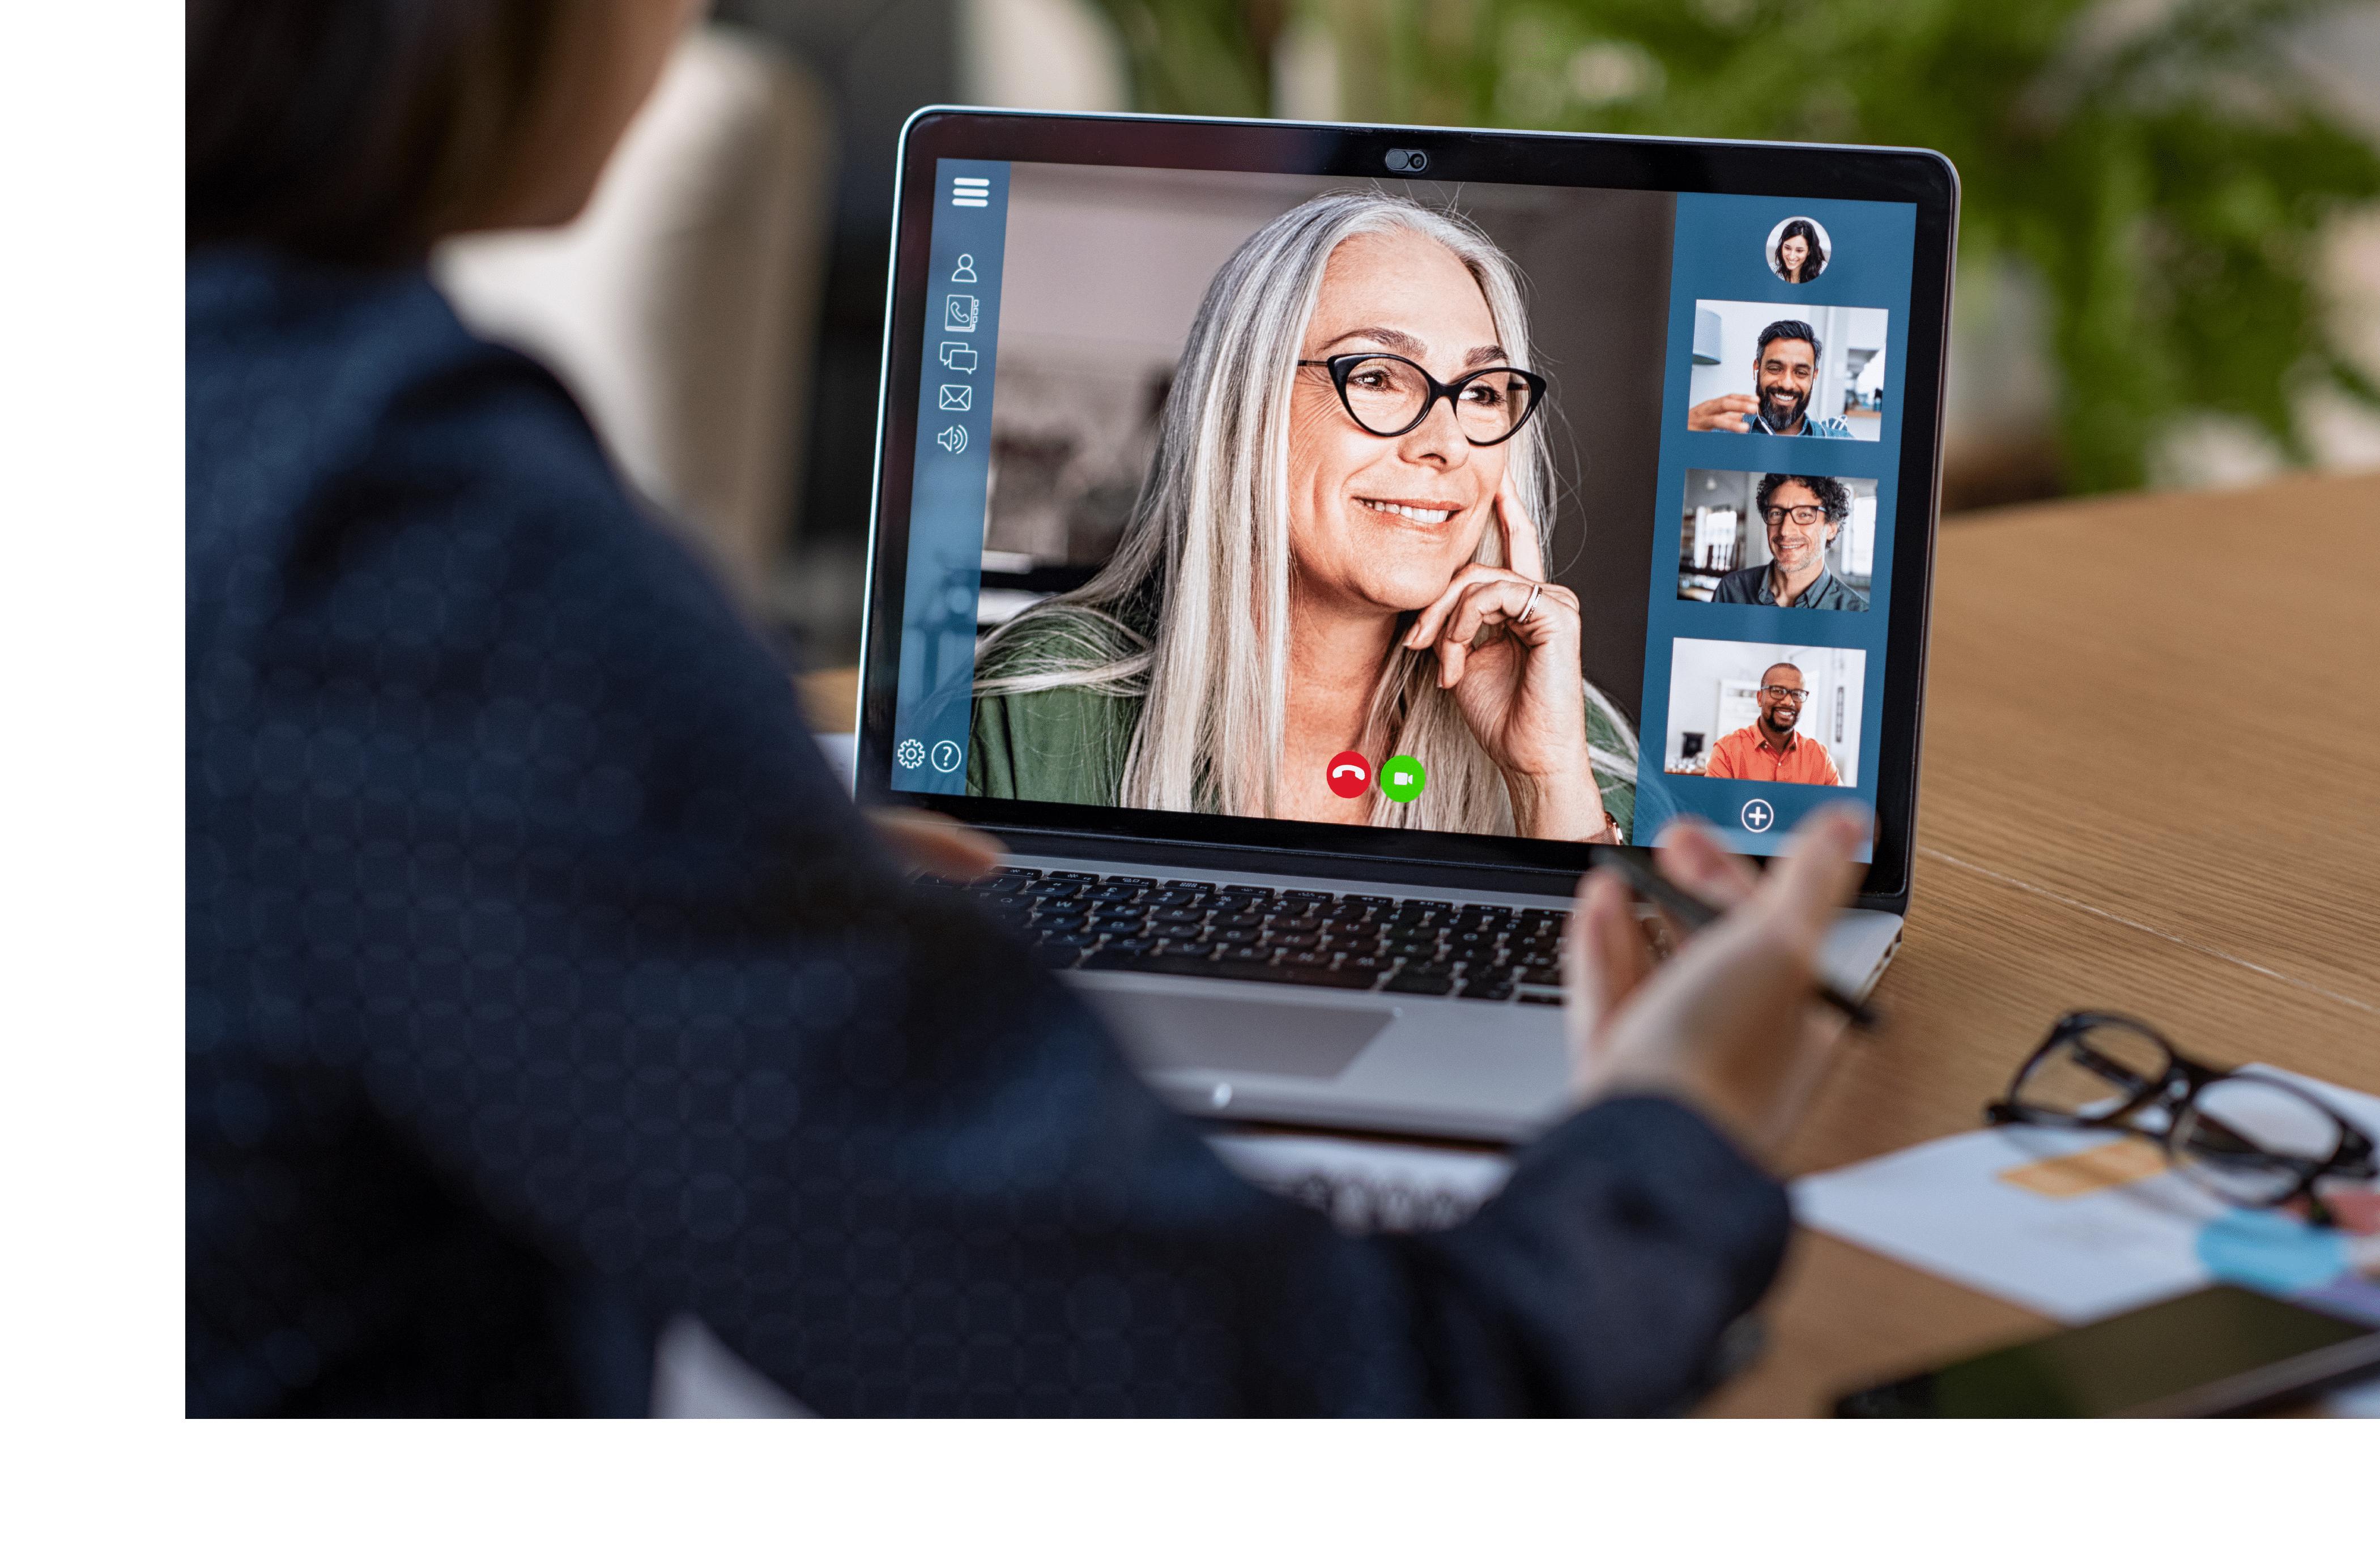 person speaking to four others on a video call